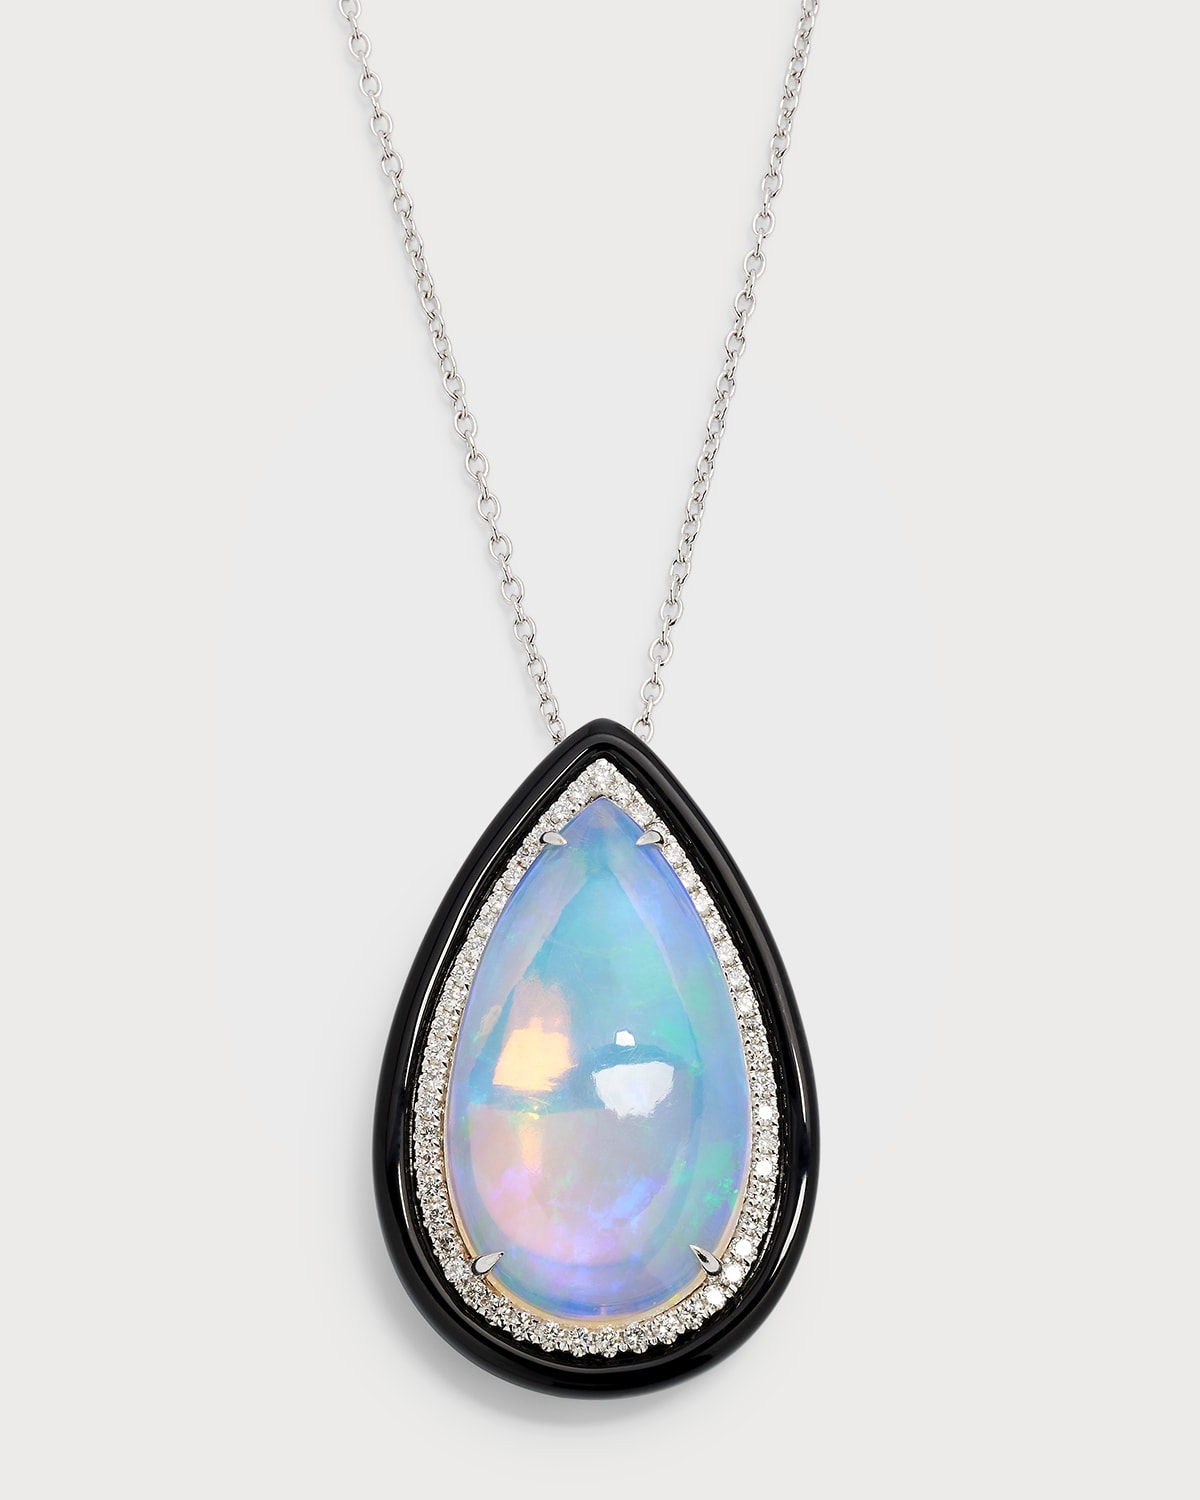 18K White Gold Pendant with Pear-Shape Opal, Diamonds and Black Frame, 14.22tcw